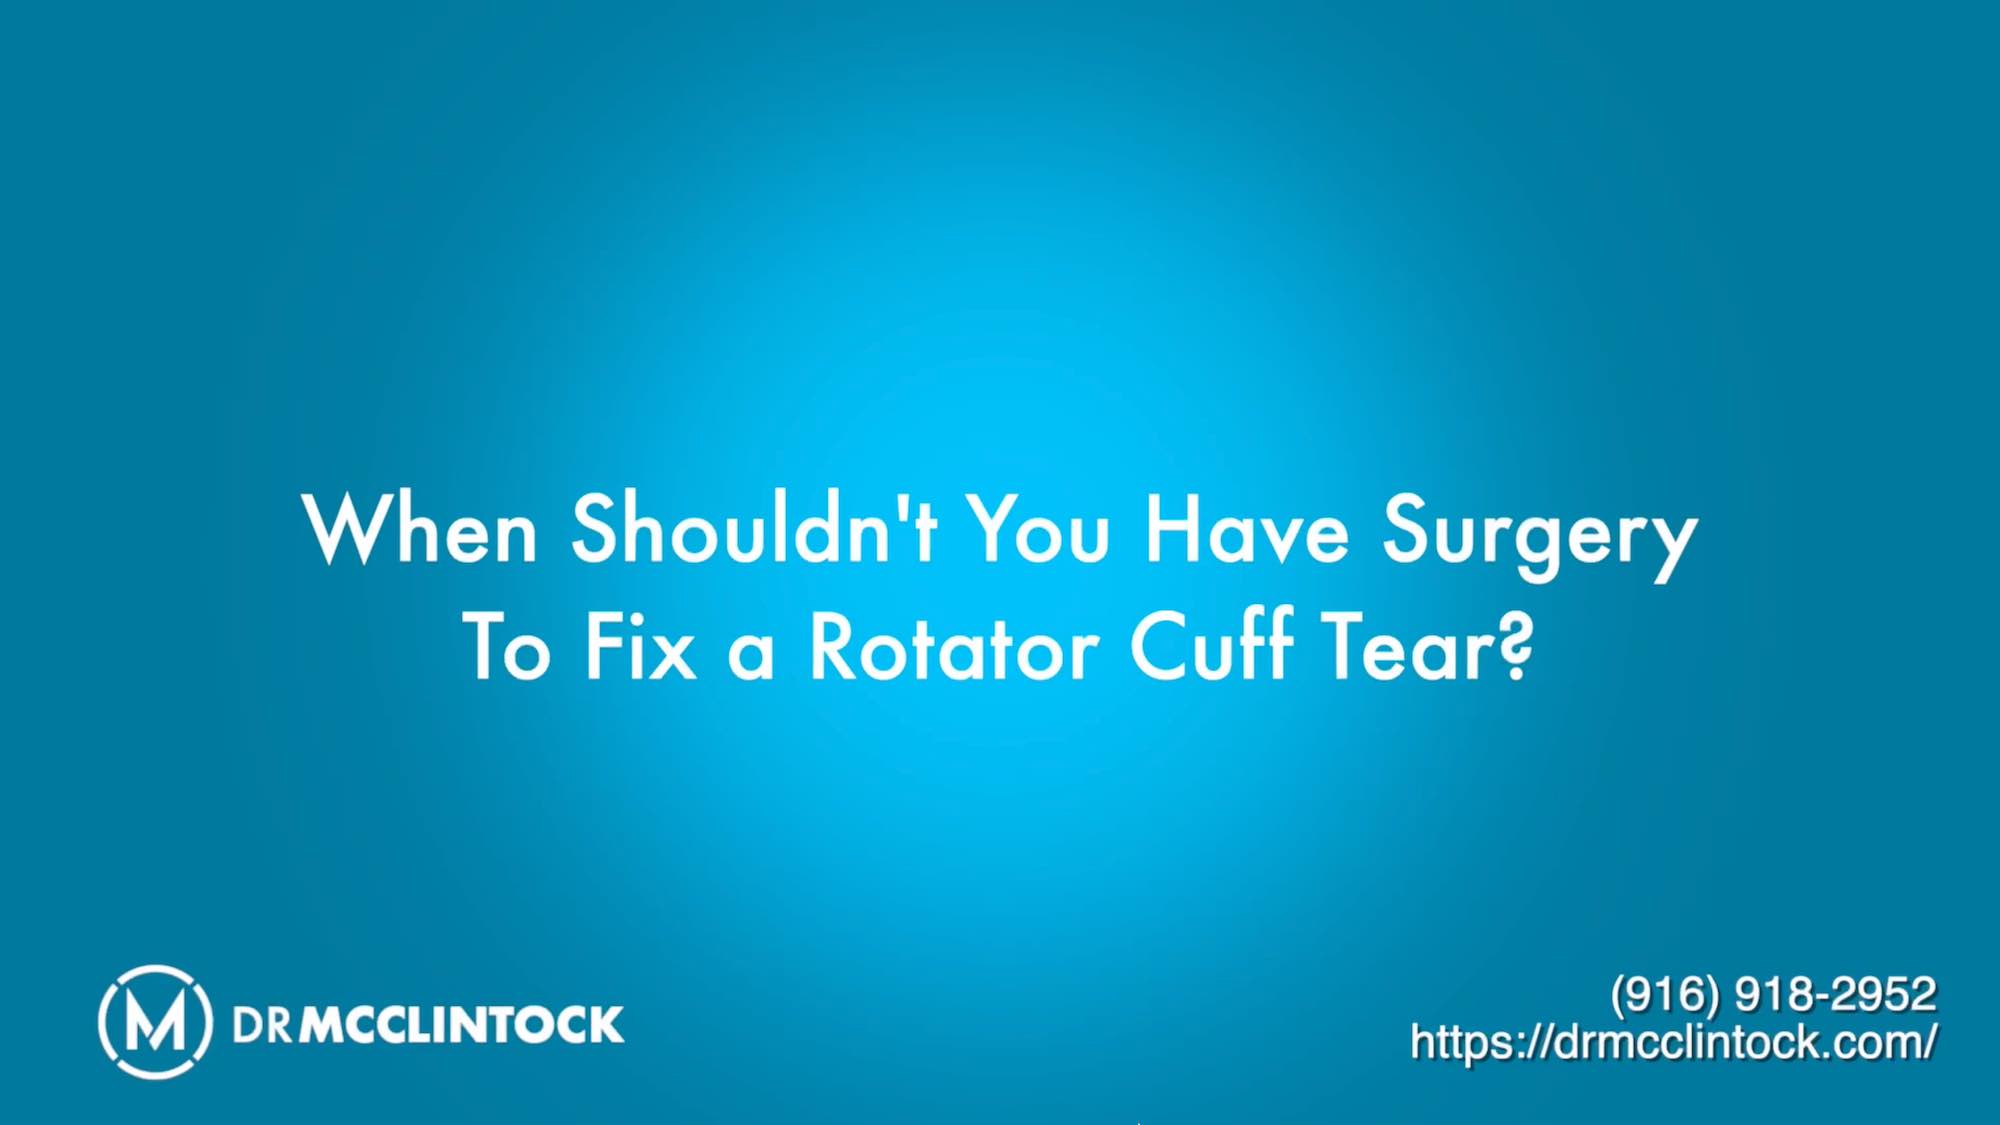 When not to have rotator cuff surgery video